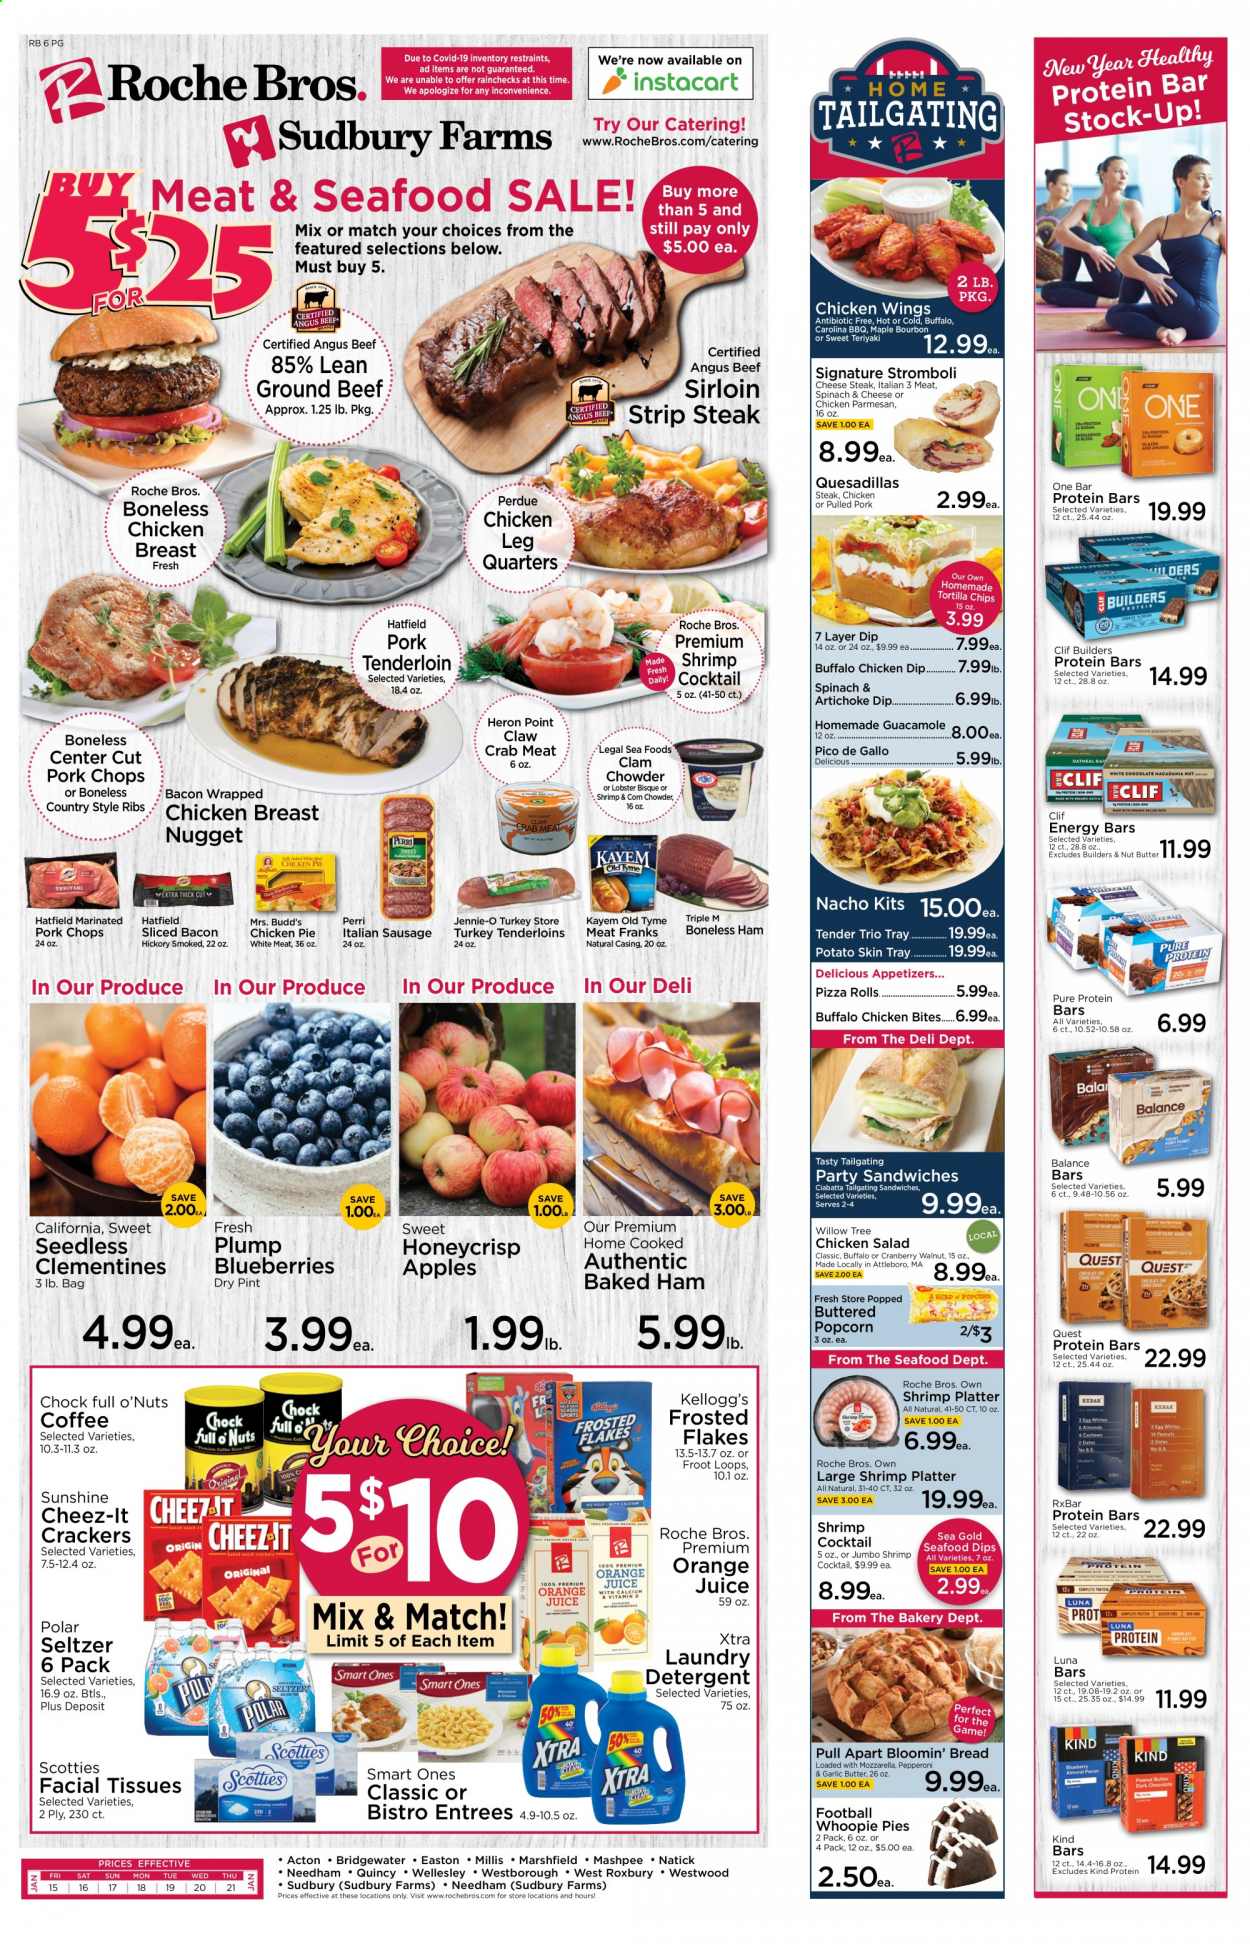 thumbnail - Roche Bros. Flyer - 01/15/2021 - 01/21/2021 - Sales products - blueberries, bread, ciabatta, pizza rolls, pie, apples, crab meat, lobster, seafood, crab, shrimps, pizza, salad, Perdue®, bacon, ham, sausage, pepperoni, italian sausage, guacamole, chicken salad, mozzarella, parmesan, Sunshine, dip, chicken wings, crackers, Kellogg's, tortilla chips, chips, popcorn, Cheez-It, clam chowder, protein bar, energy bar, Frosted Flakes, teriyaki sauce, nut butter, walnuts, orange juice, juice, seltzer water, coffee, bourbon, bourbon whiskey, chicken breasts, chicken bites, beef meat, beef sirloin, ground beef, striploin steak, pork chops, pork meat, pork tenderloin, marinated pork, pulled pork, country style ribs, tissues, detergent, laundry detergent, XTRA, facial tissues, clementines. Page 1.